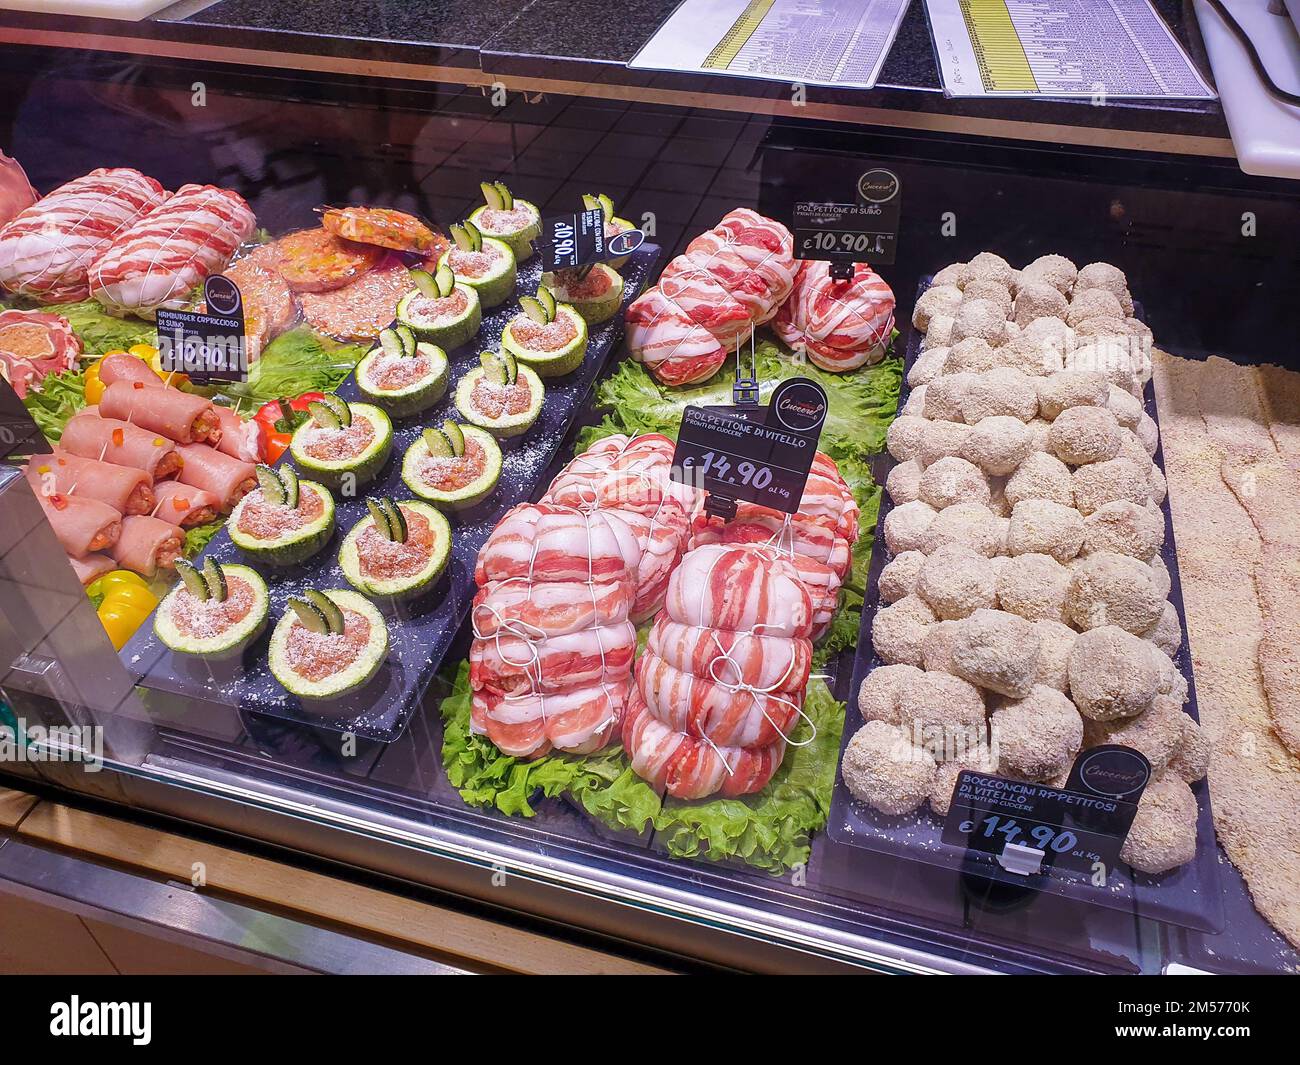 Bergamo, Italy - April 29, 2022: Food selection in Italian Iper supermarket. Fresh meat and veal display. Stock Photo